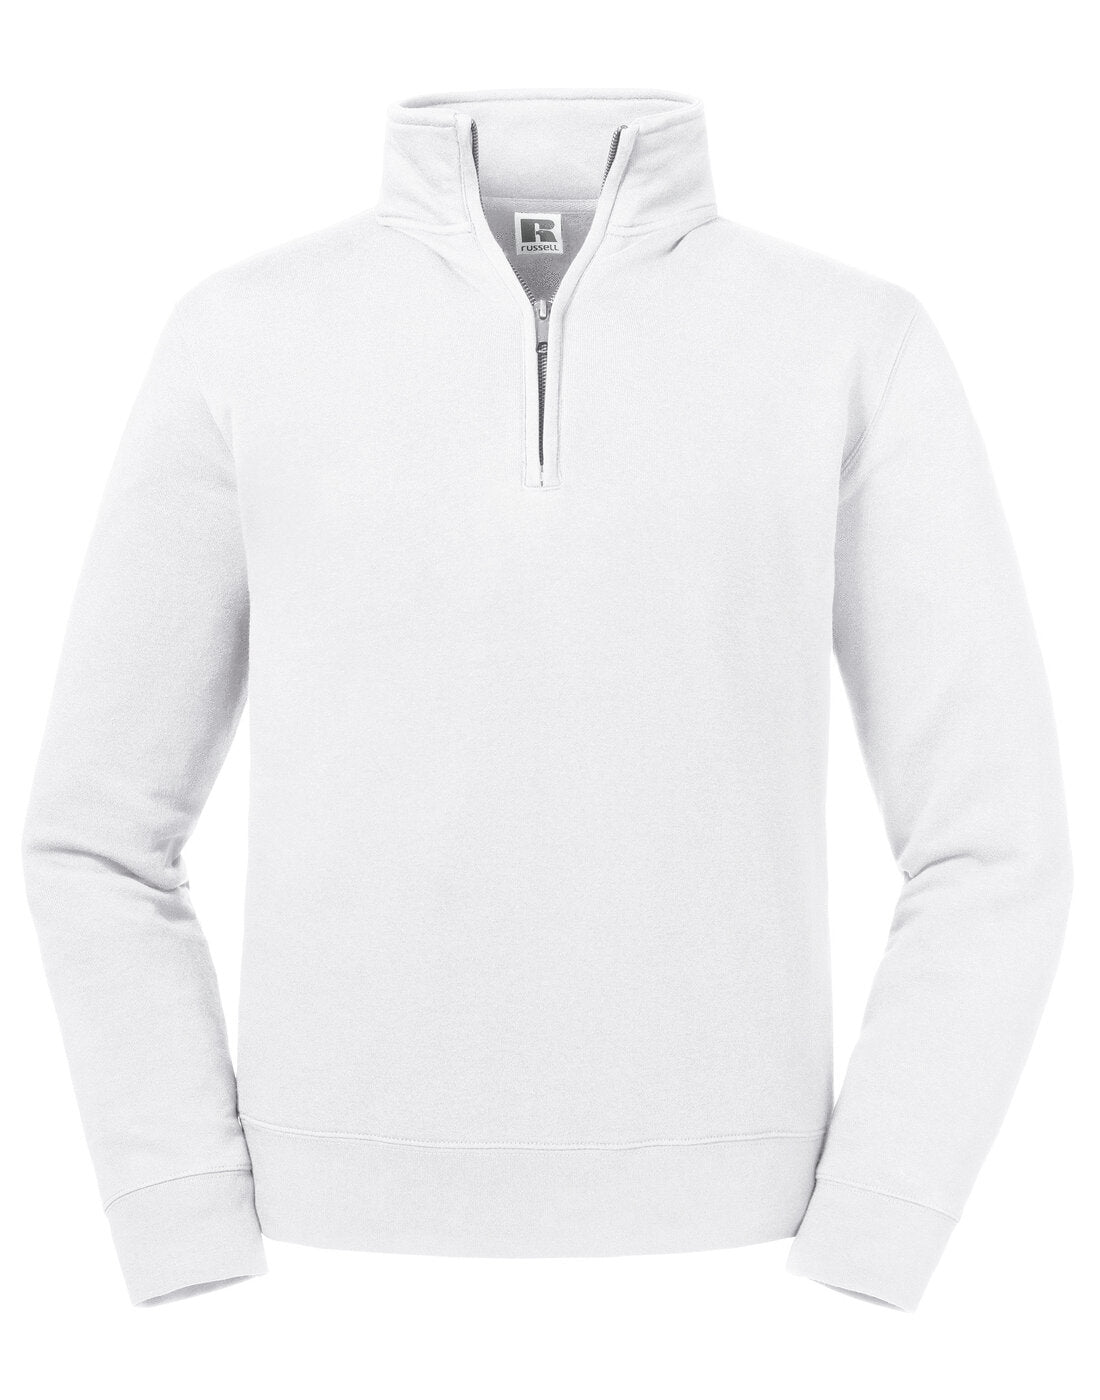 Russell Authentic 1/4 Zip Sweat